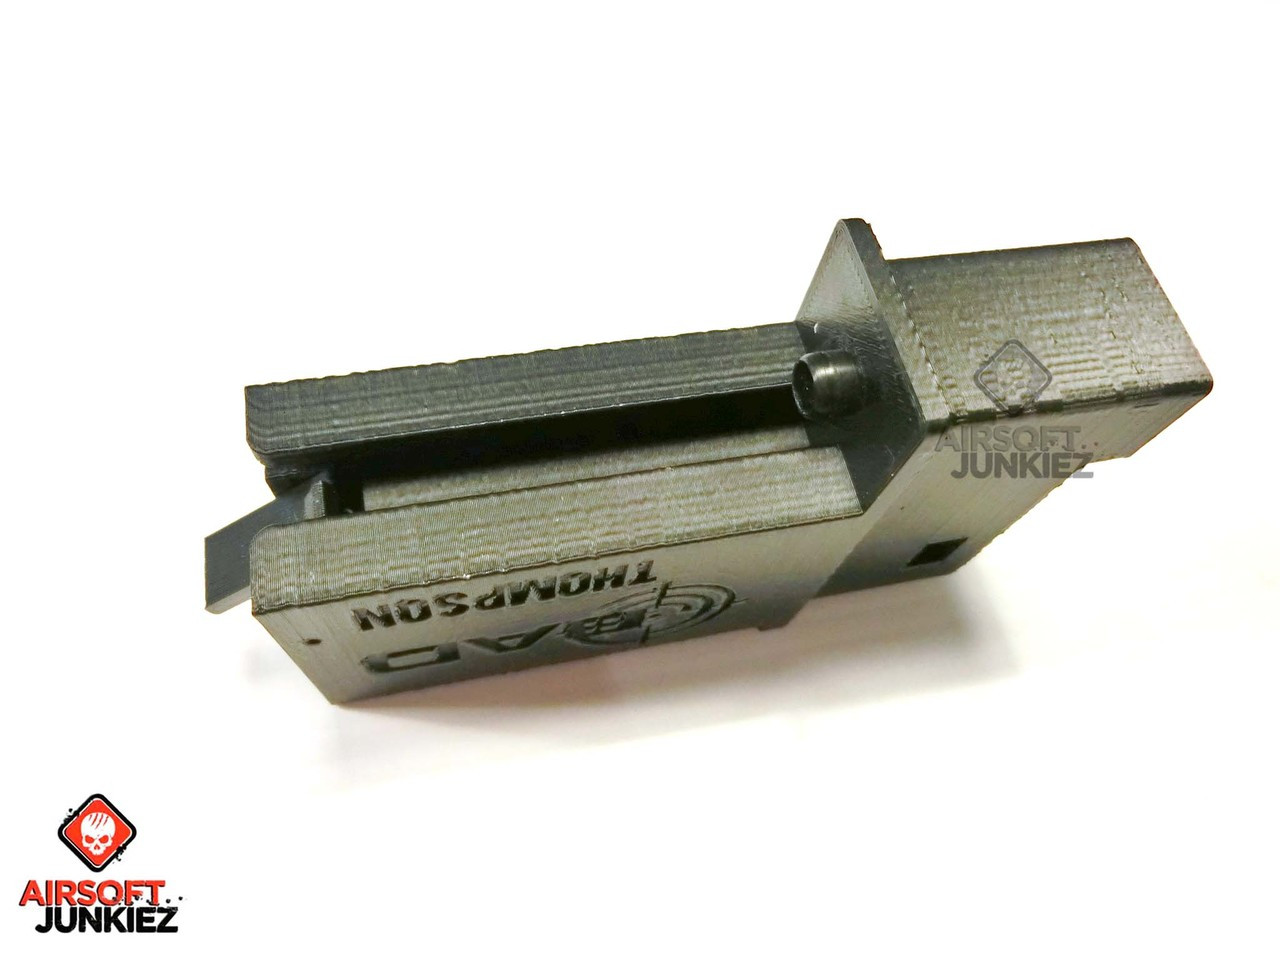 Airsoftjunkiez - Odin Adapter for Thompson